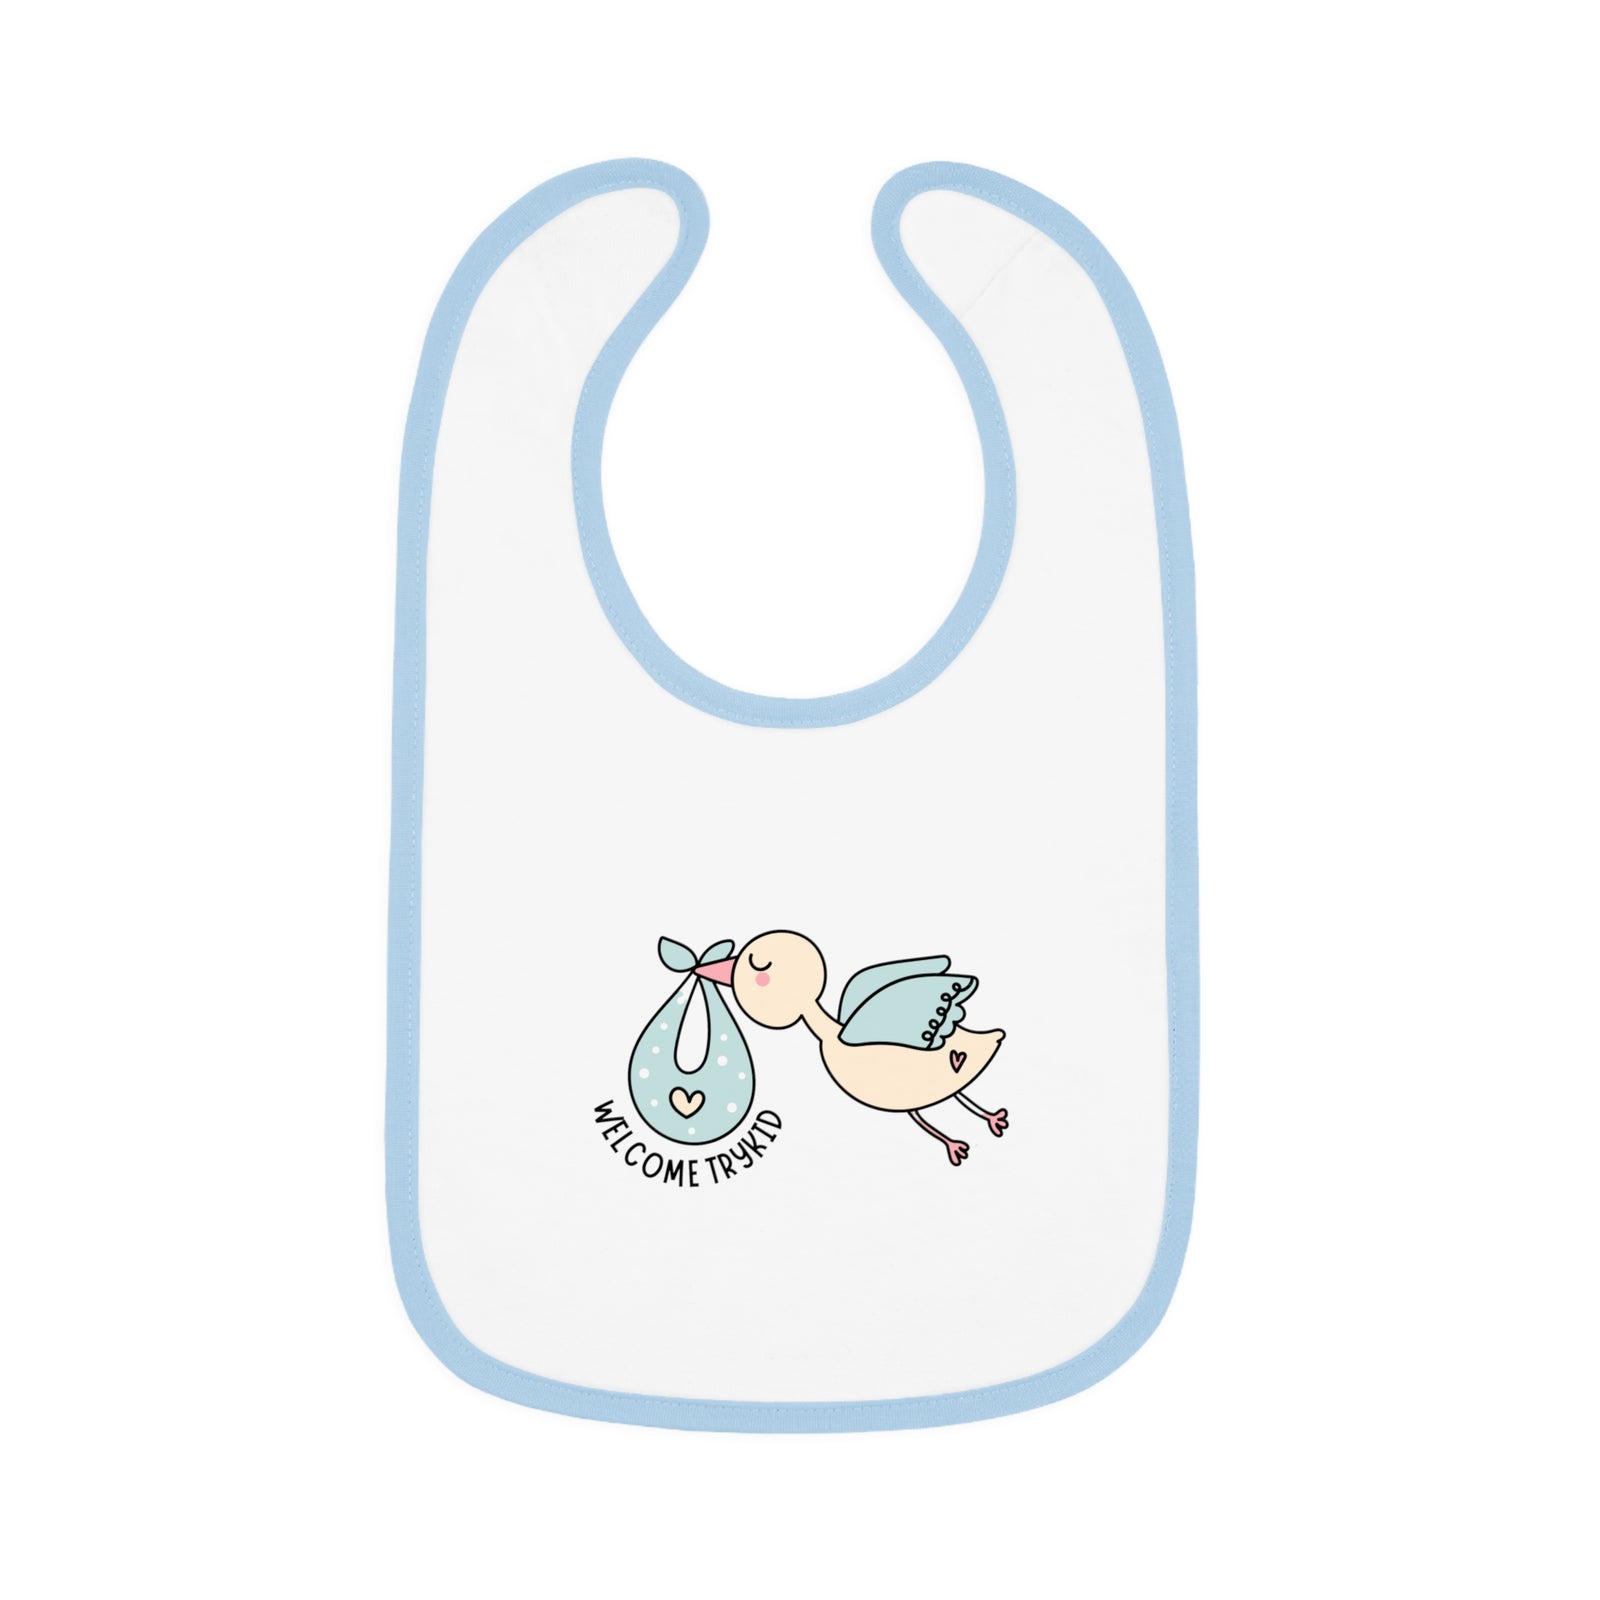 Adorable Baby Contrast Trim Jersey Bib with Exclusive TryKid Logo and Charming Bird Design - A Stylish and Practical Essential for Mess-Free Meals